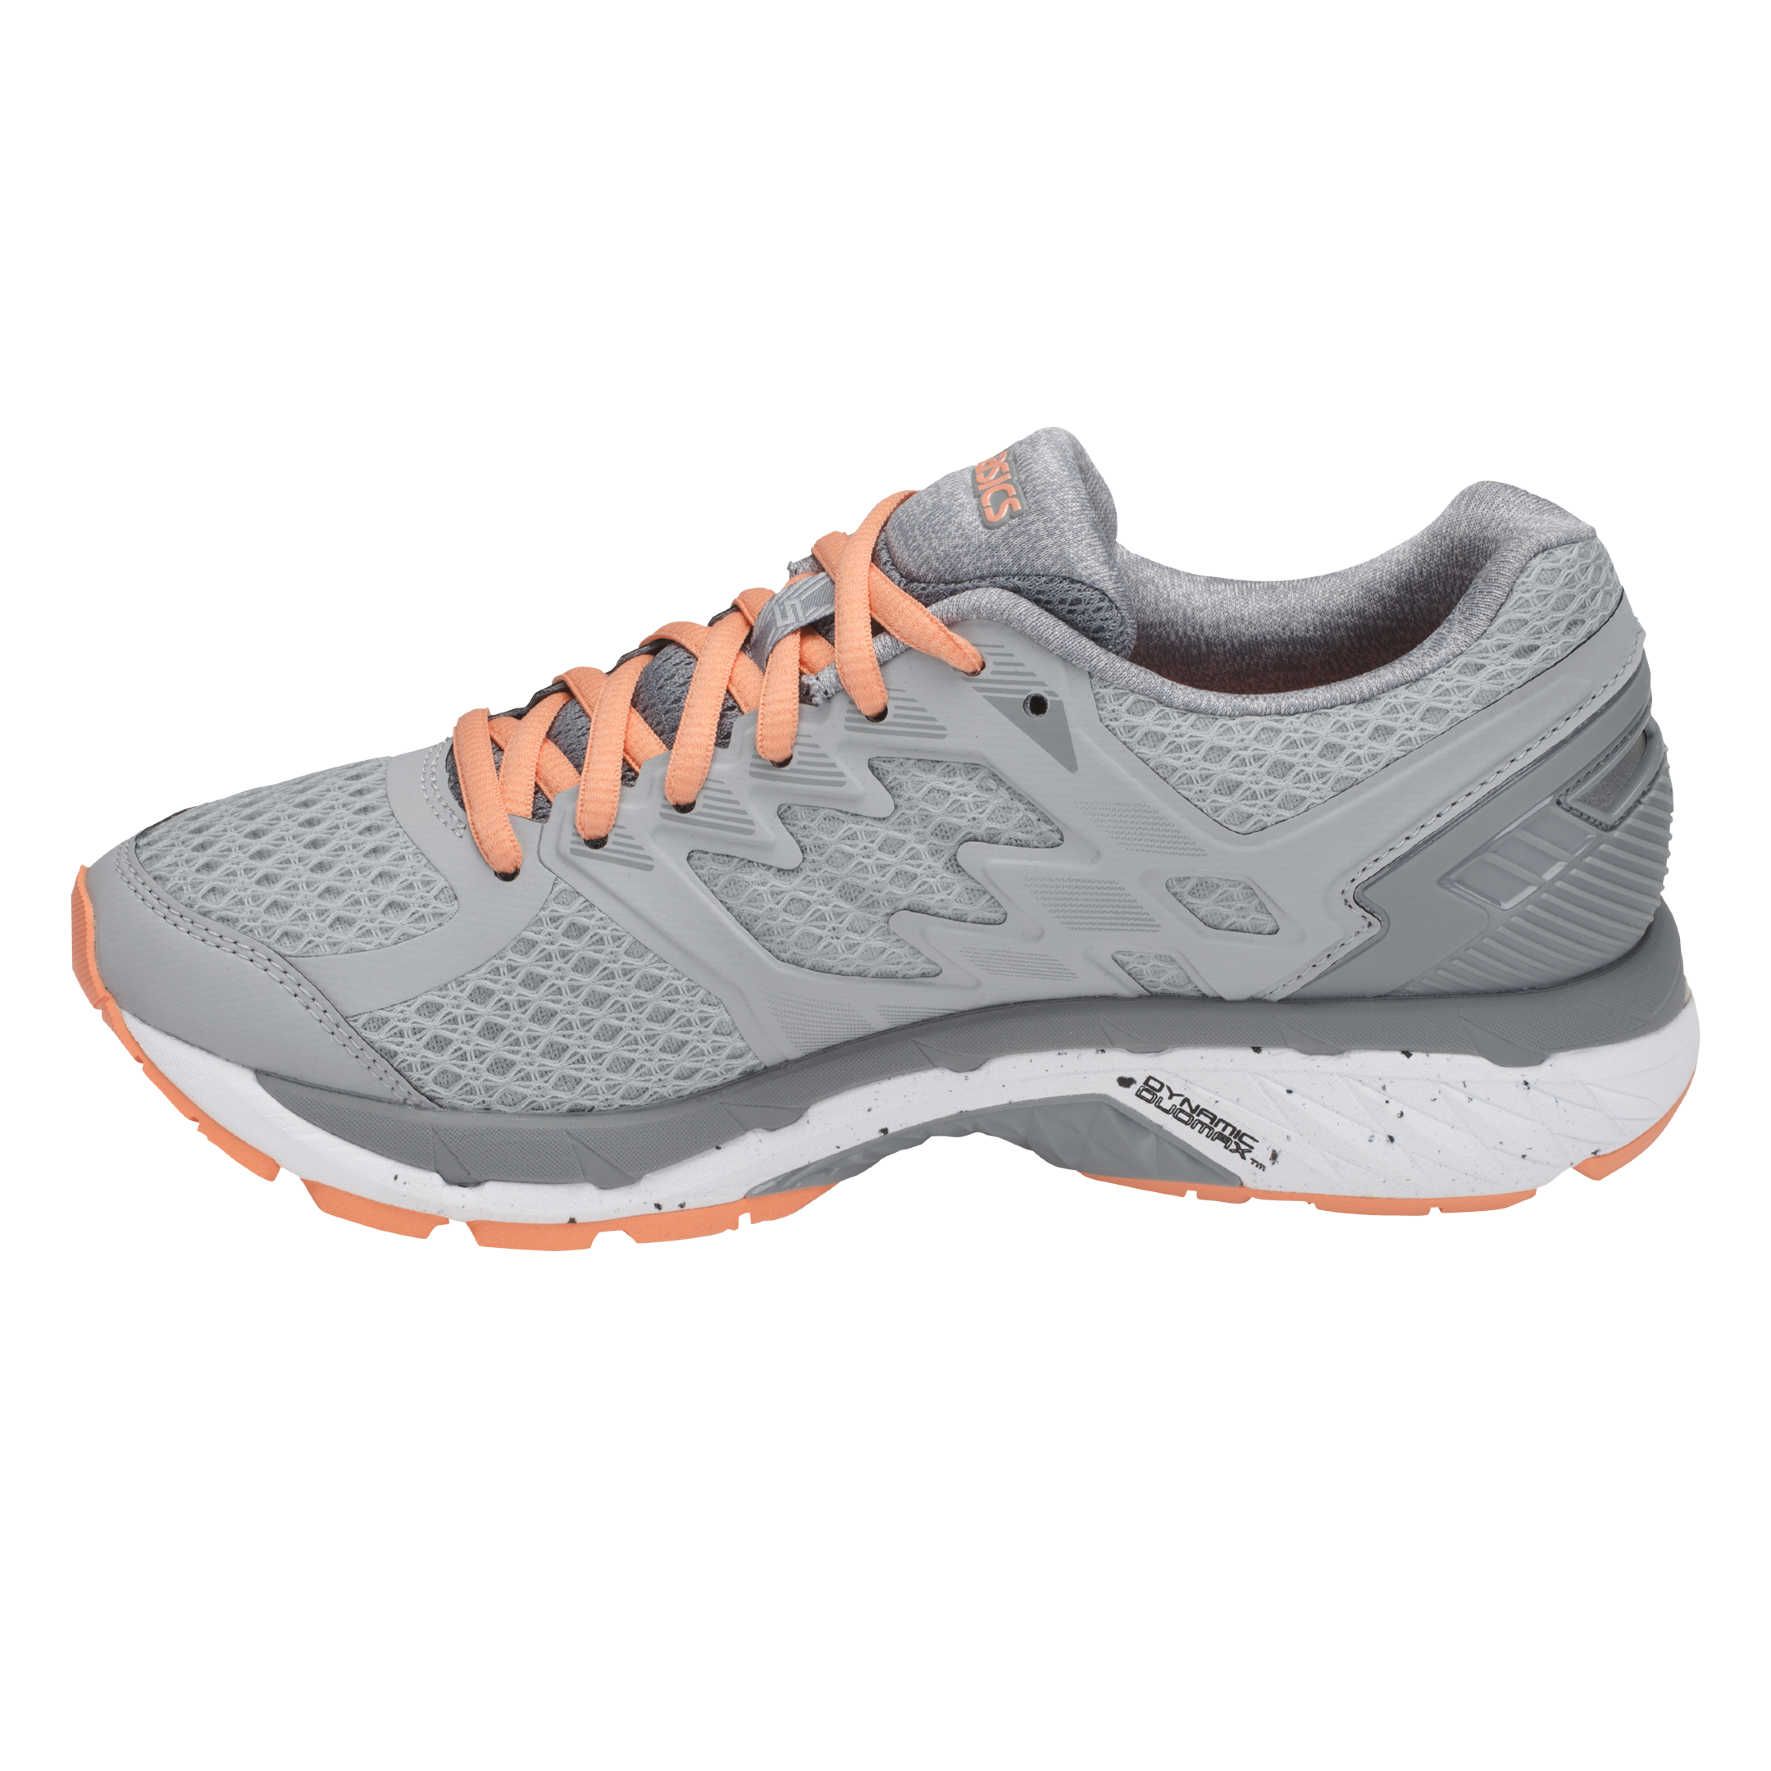 Chaussures Running Femmes Asics GT3000 5 - Mid Grey/Stone Grey/Canteloupe